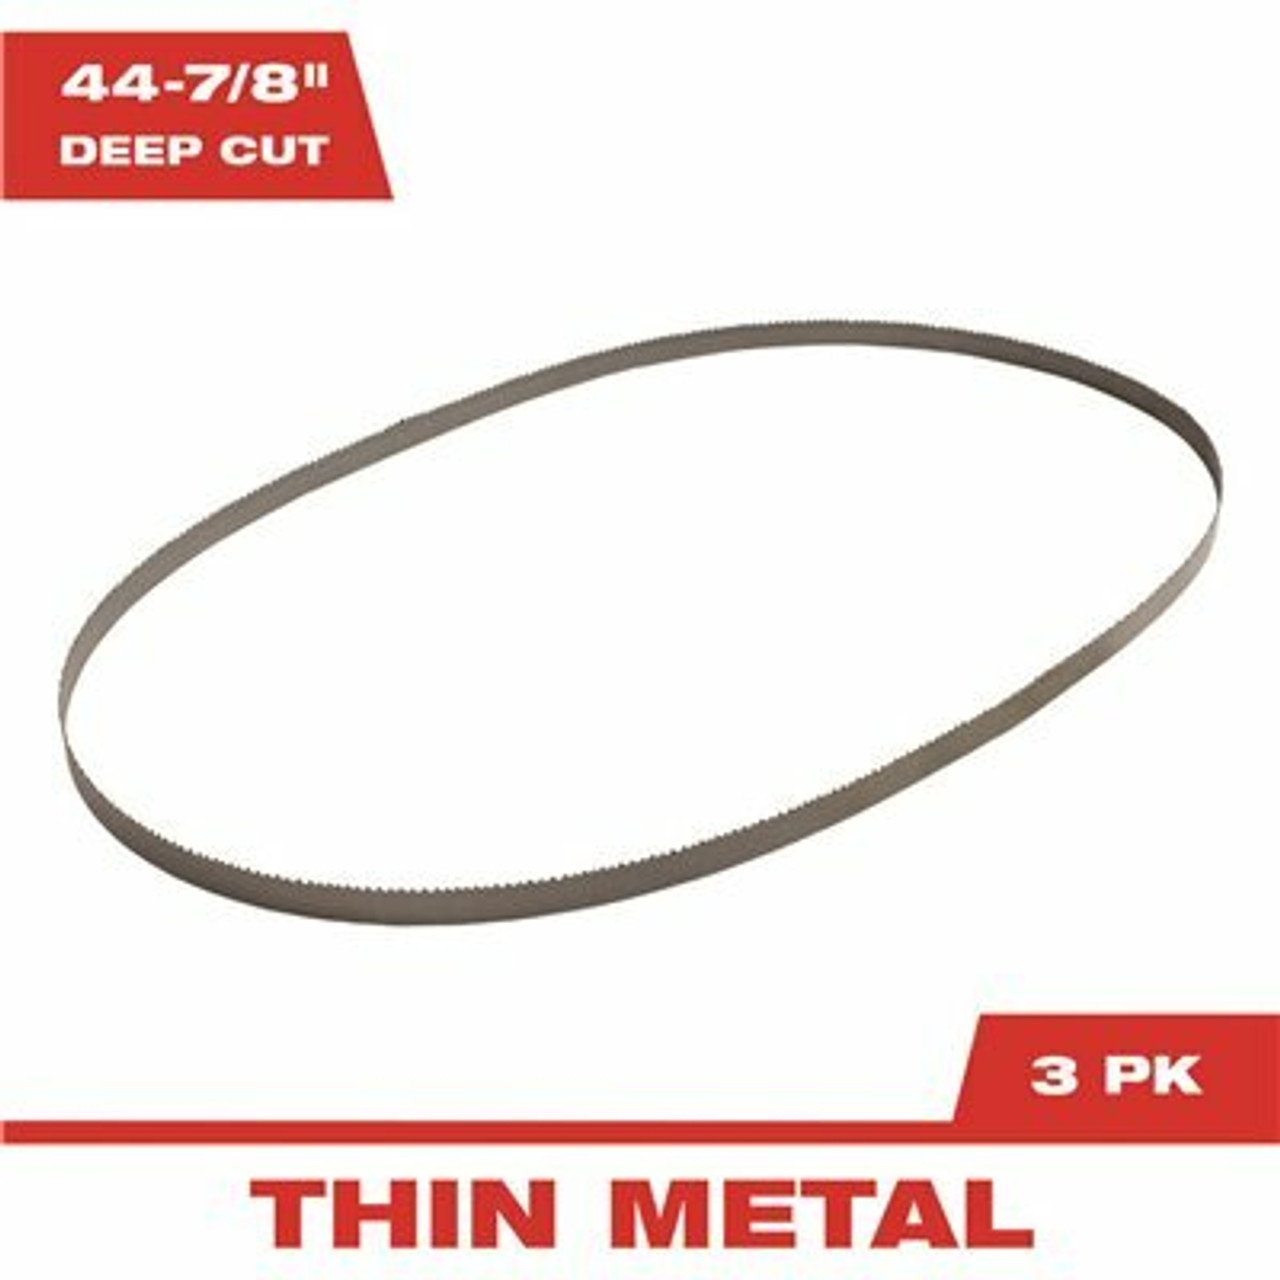 Milwaukee 44-7/8 In. 18 Tpi Deep Cut Portable Bi-Metal Band Saw Blade (3-Pack) For M18 Fuel/Corded